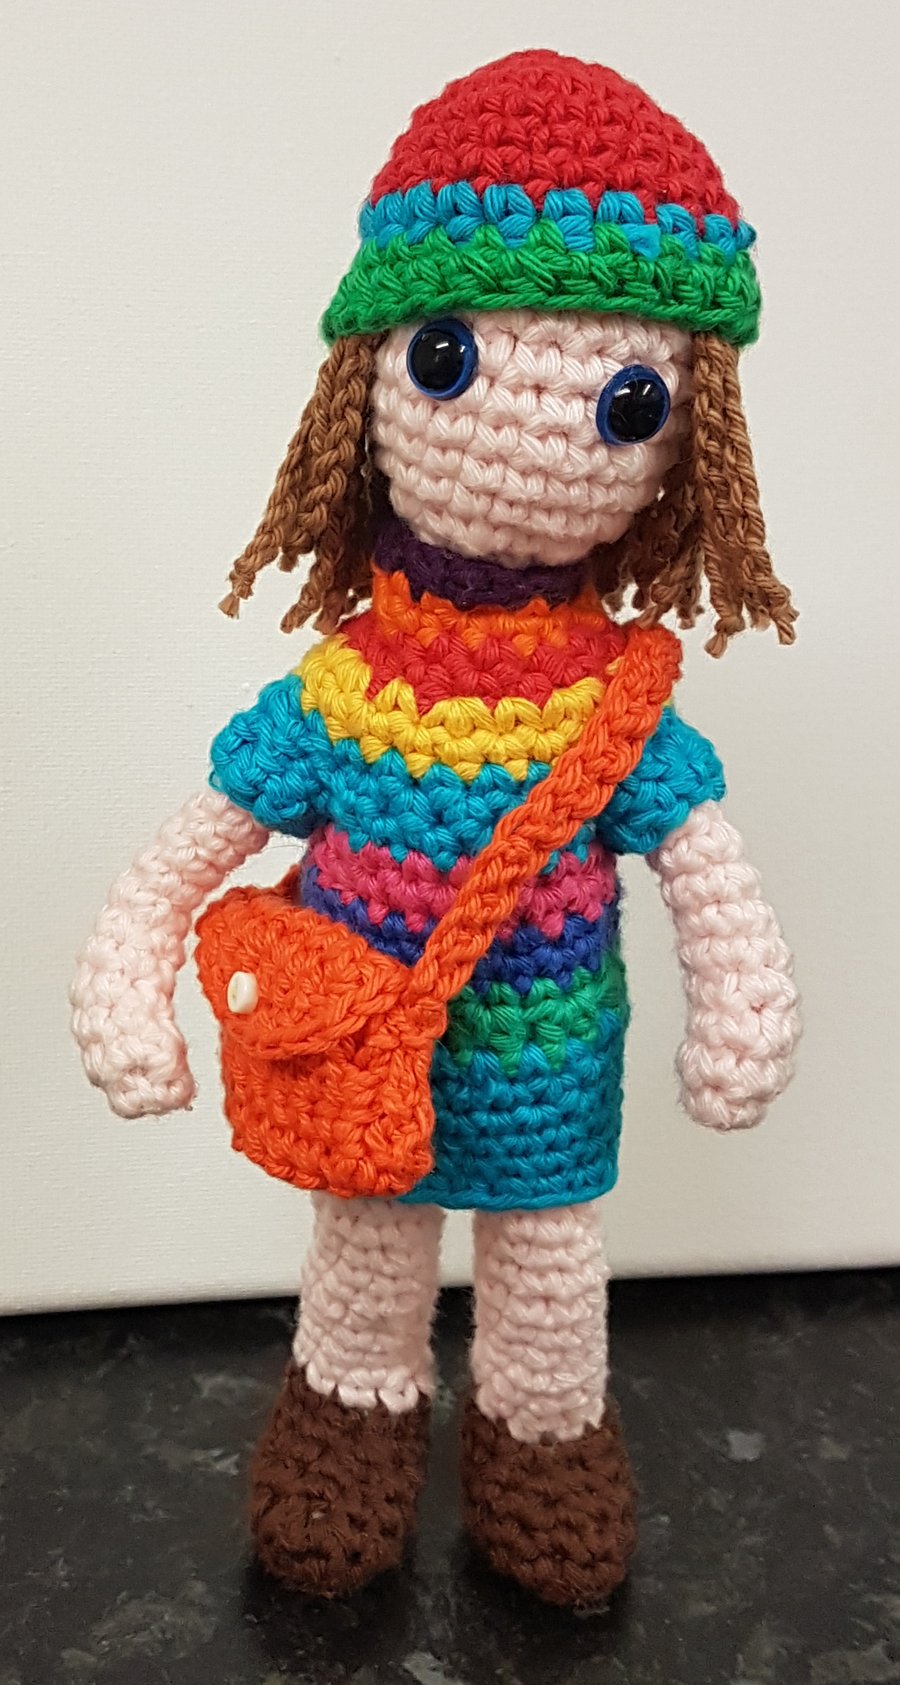 Crochet doll with bag 